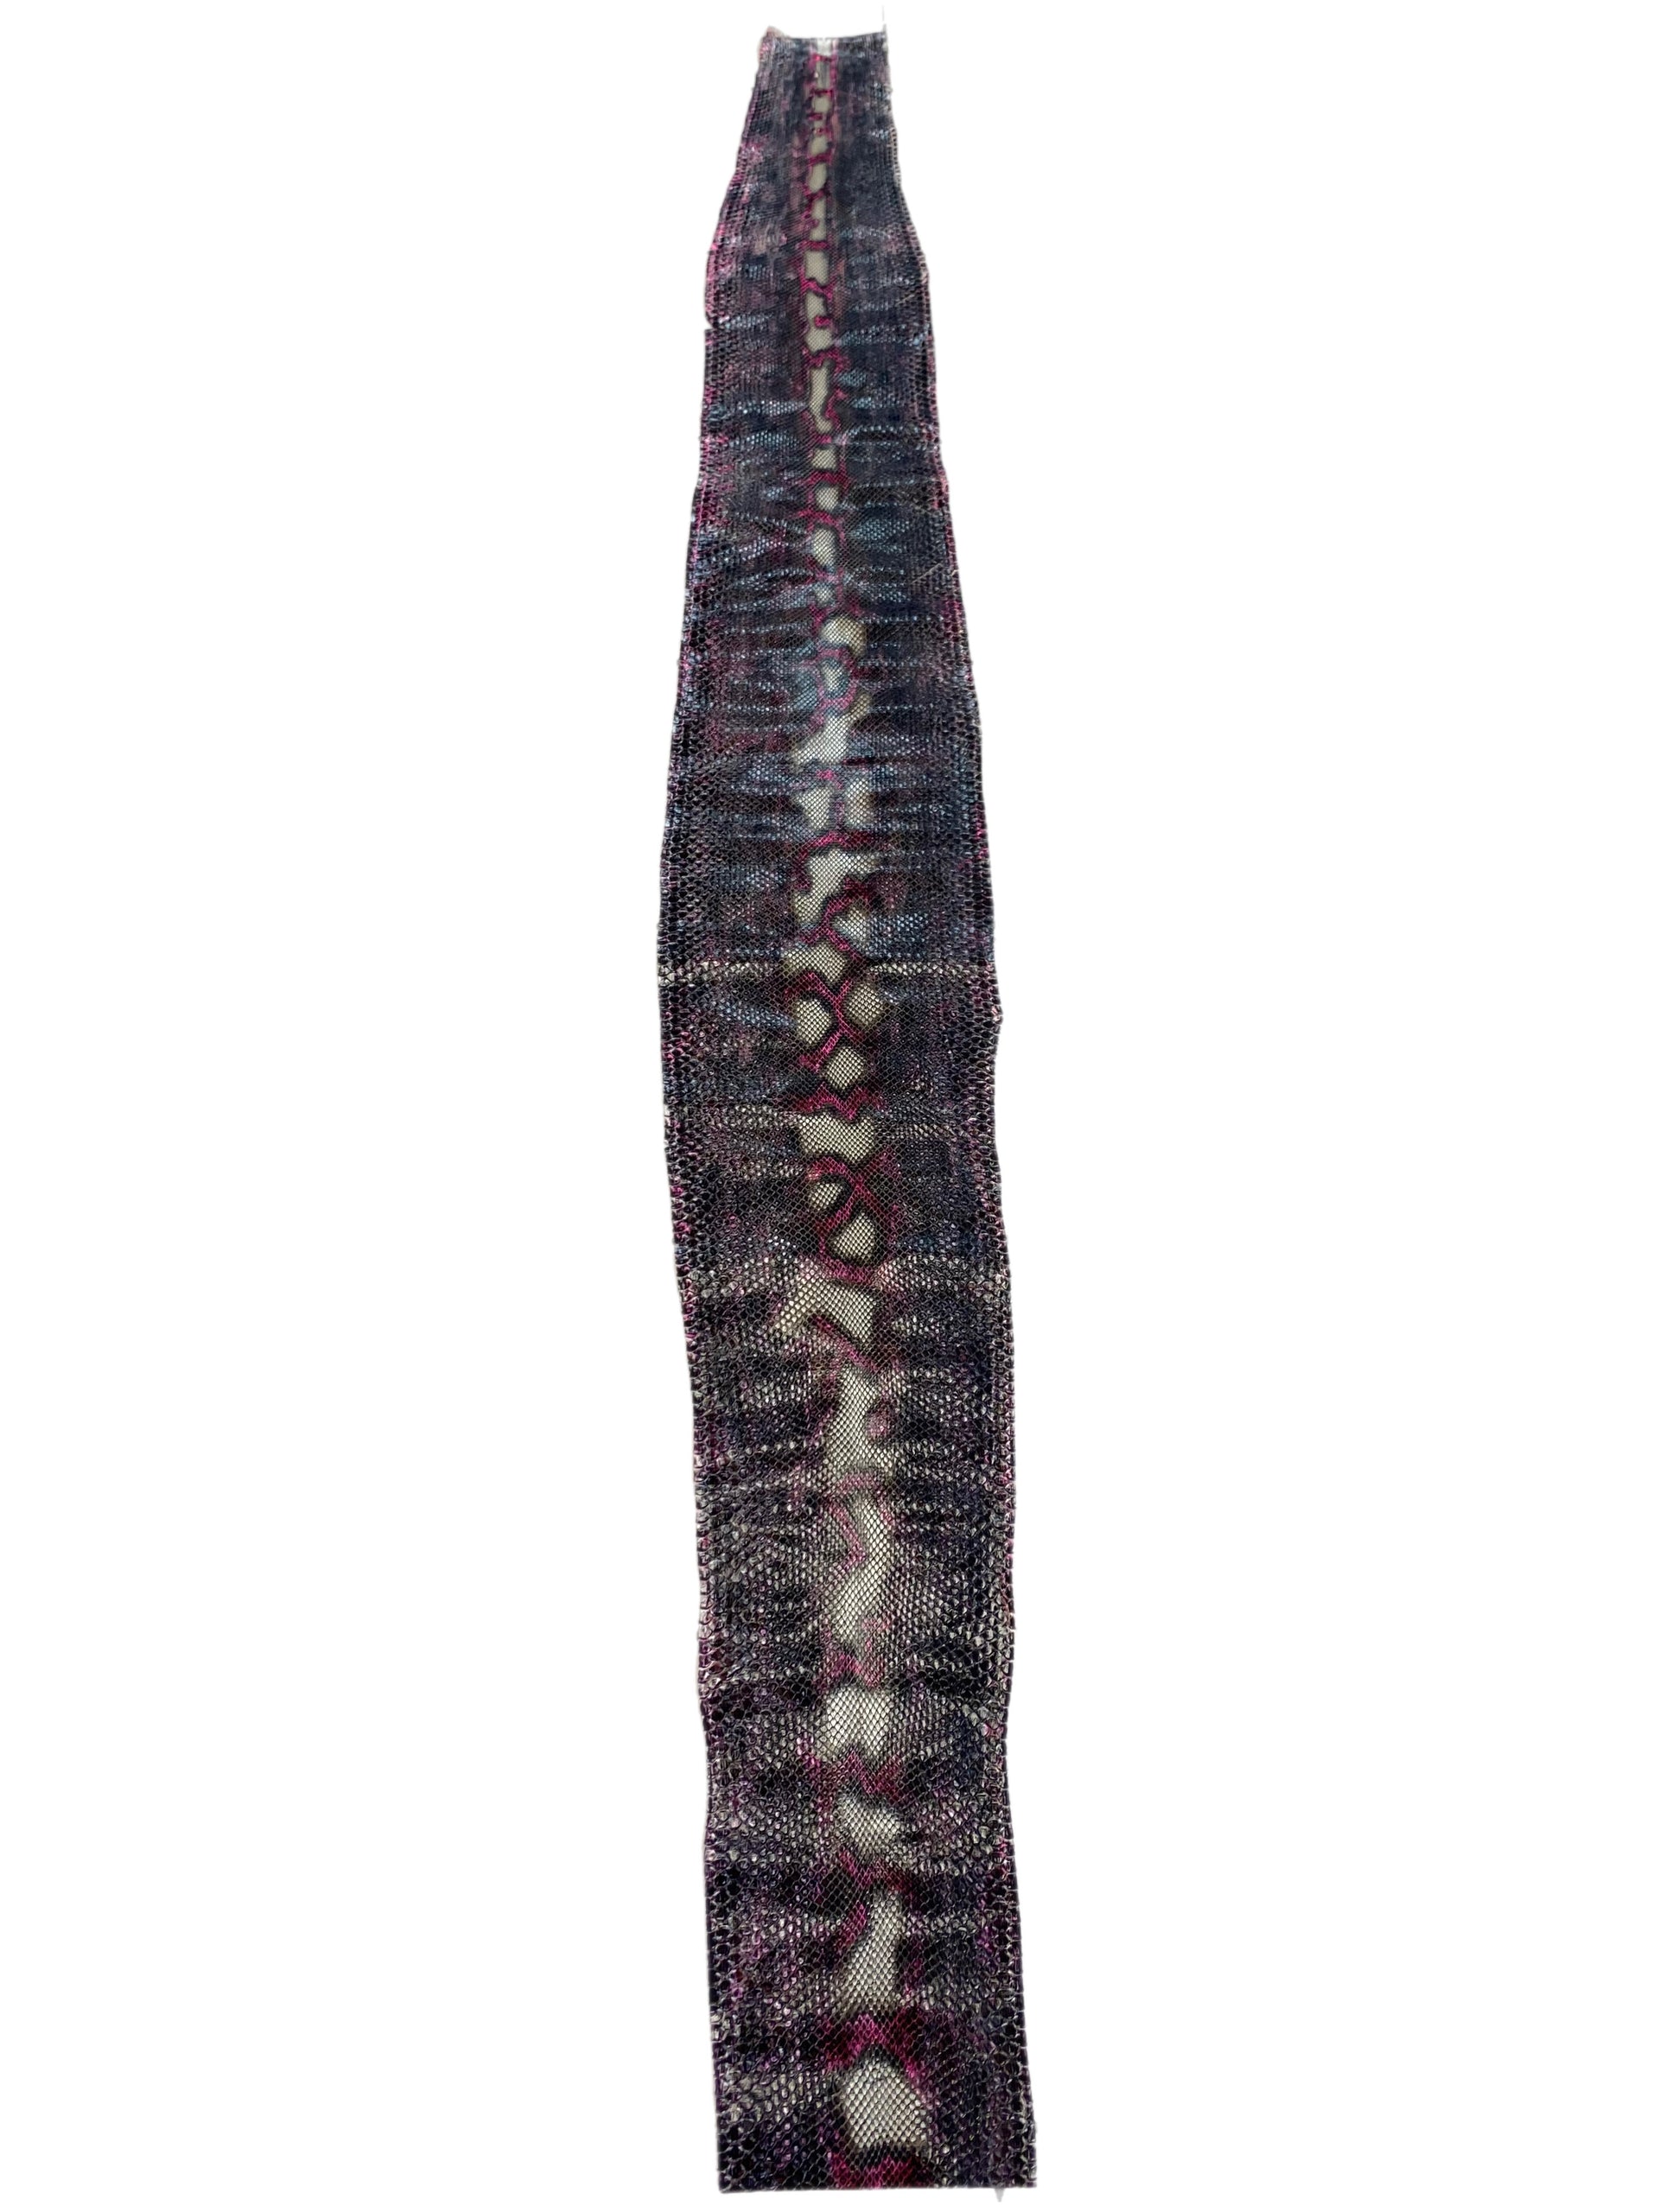 2.24 M Front Cut Black/Purple/Pink Hand Painted Glazed Python Leather  With Markings